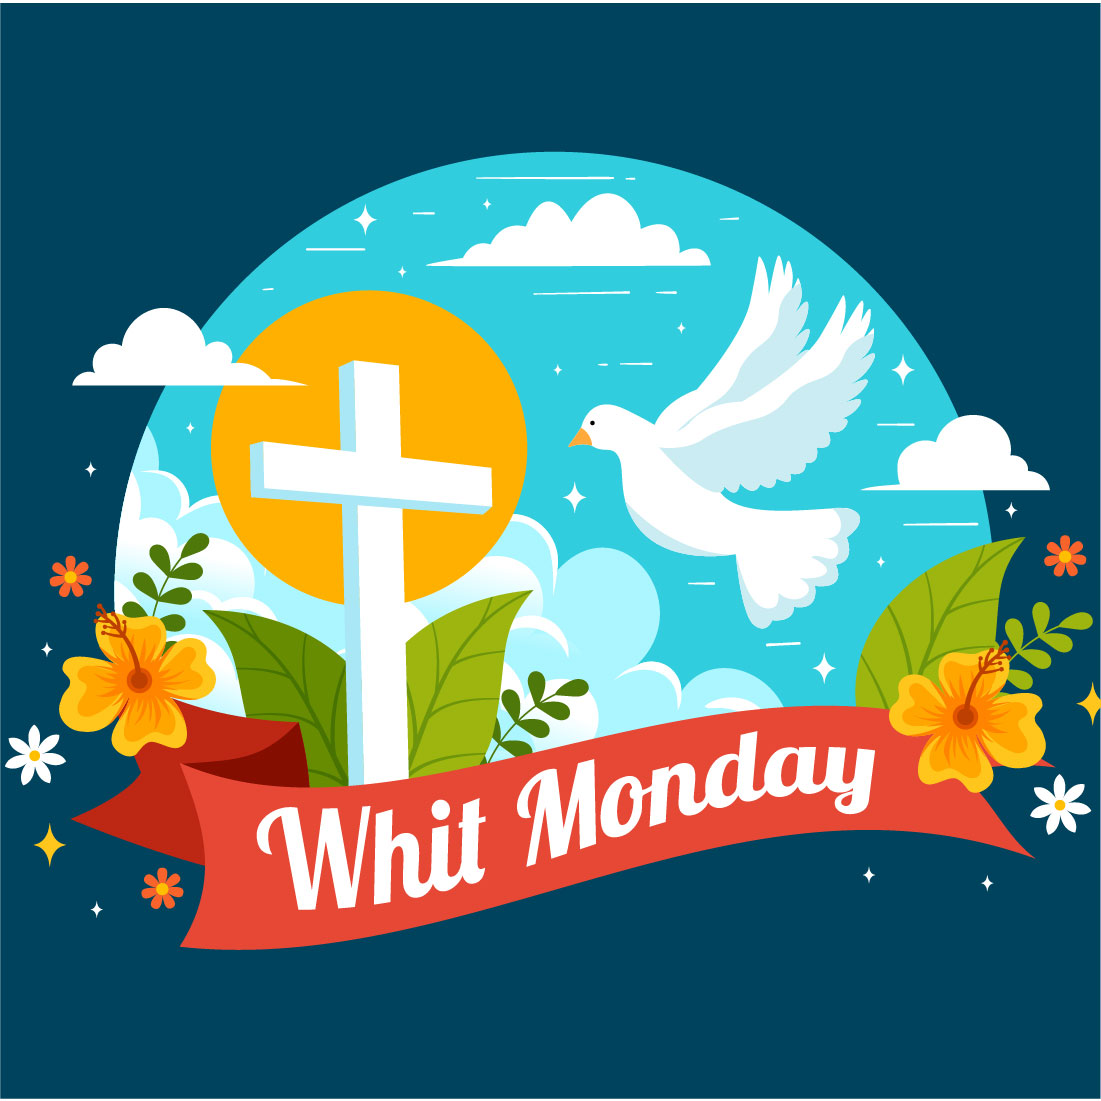 12 Whit Monday Illustration preview image.